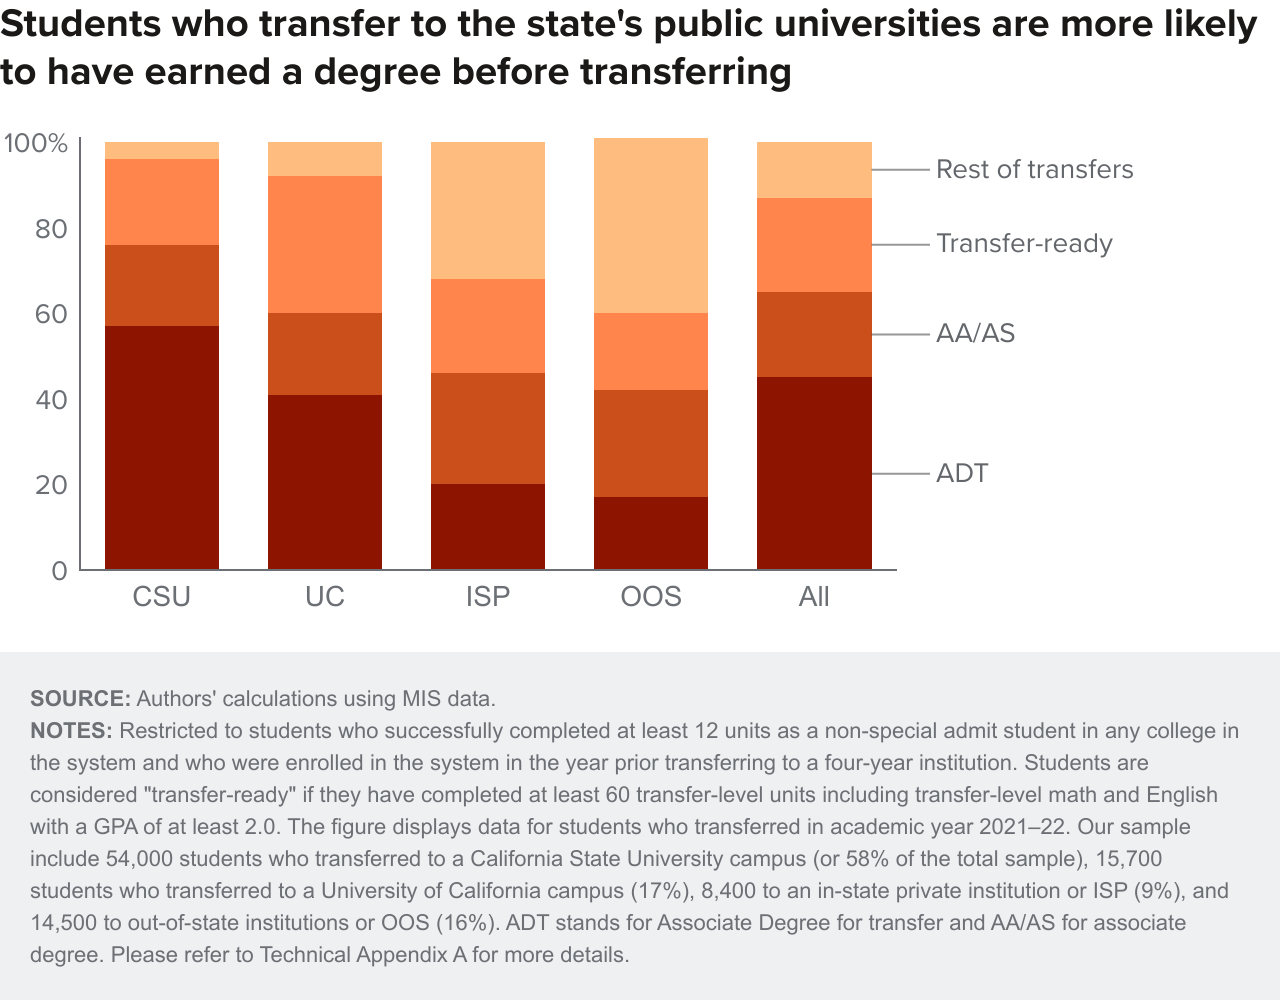 figure 18 - Students who transfer to the state's public universities are more likely to have earned a degree before transferring